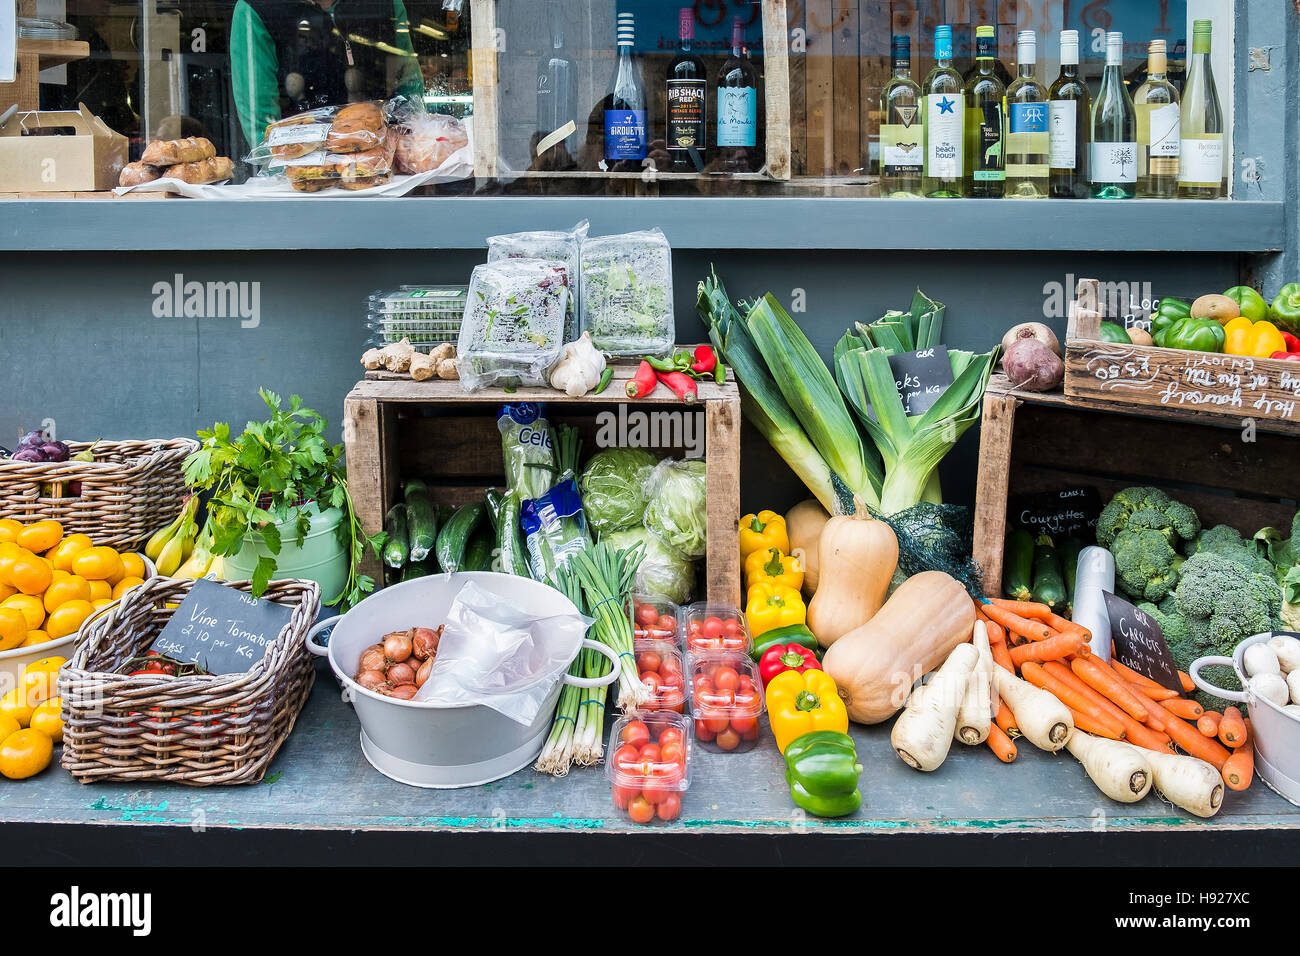 A display of fruit and vegetables outside a shop. Stock Photo